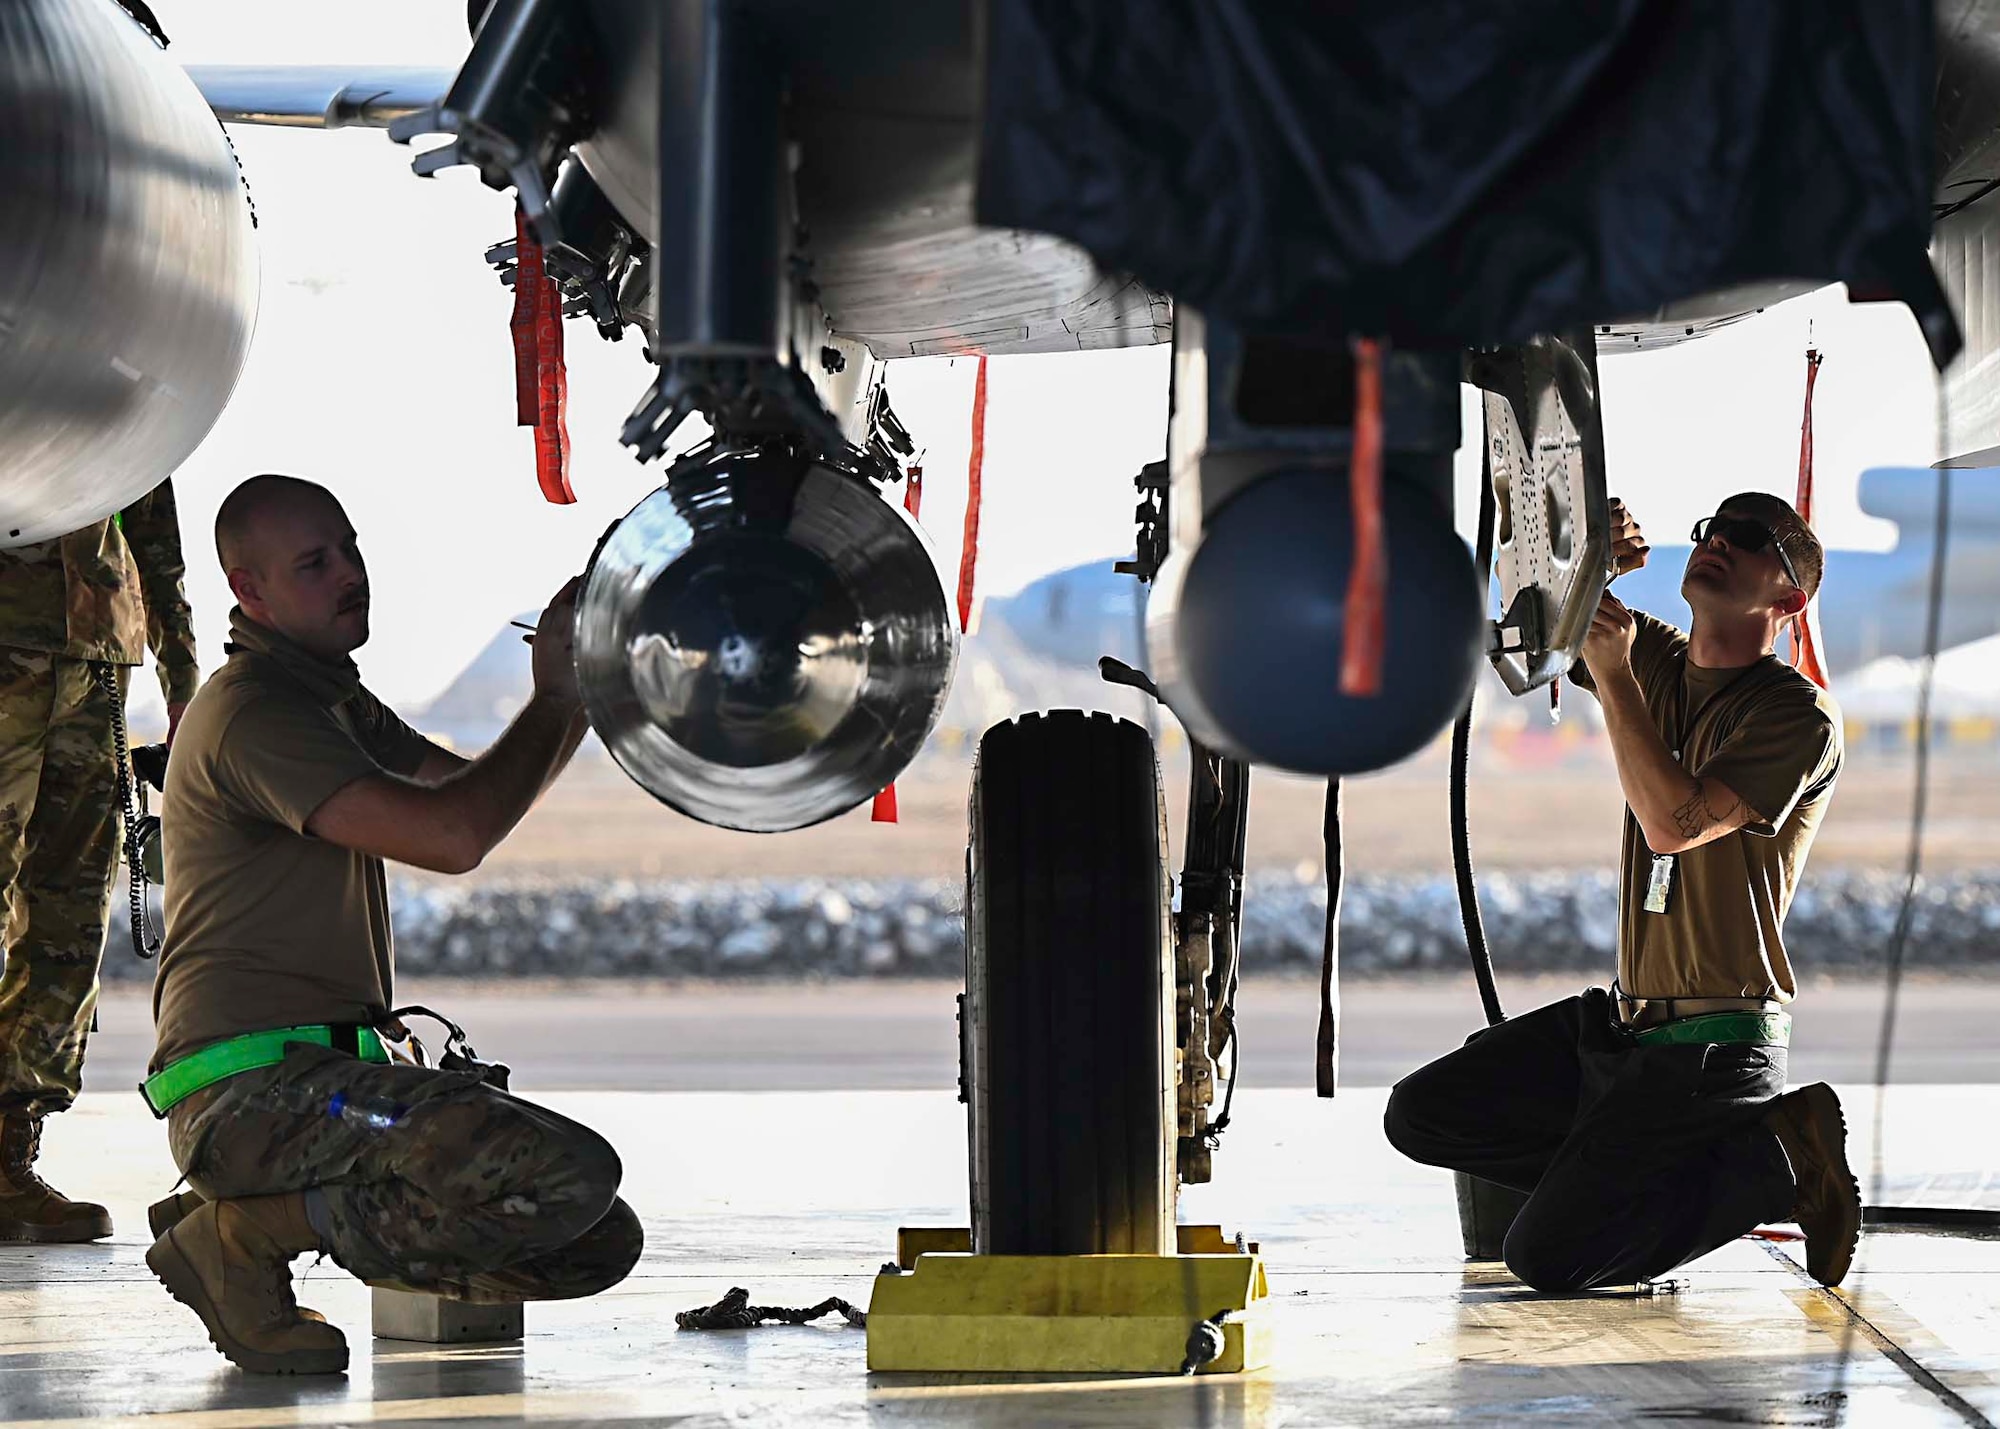 Two U.S. Air Force F-15E Strike Eagle dedicated crew chiefs assigned to the 380th Expeditionary Aircraft Maintenance Squadron (EAMXS) perform maintenance on an F-15E at Al Dhafra Air Base, United Arab Emirates, Jan. 19, 2021.